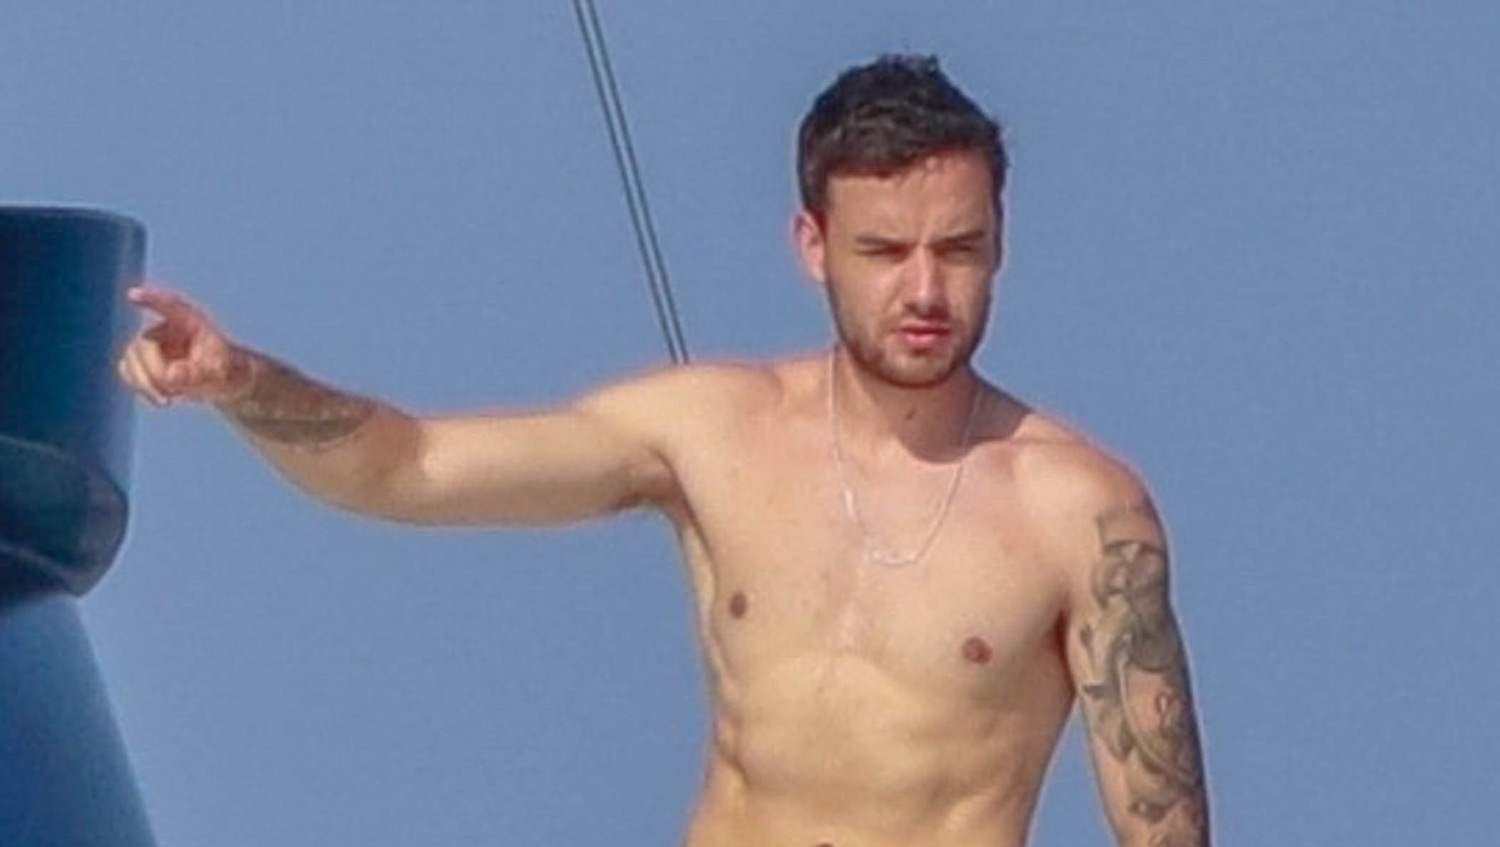 Download Liam Payne Shirtless Pictures - One Direction 